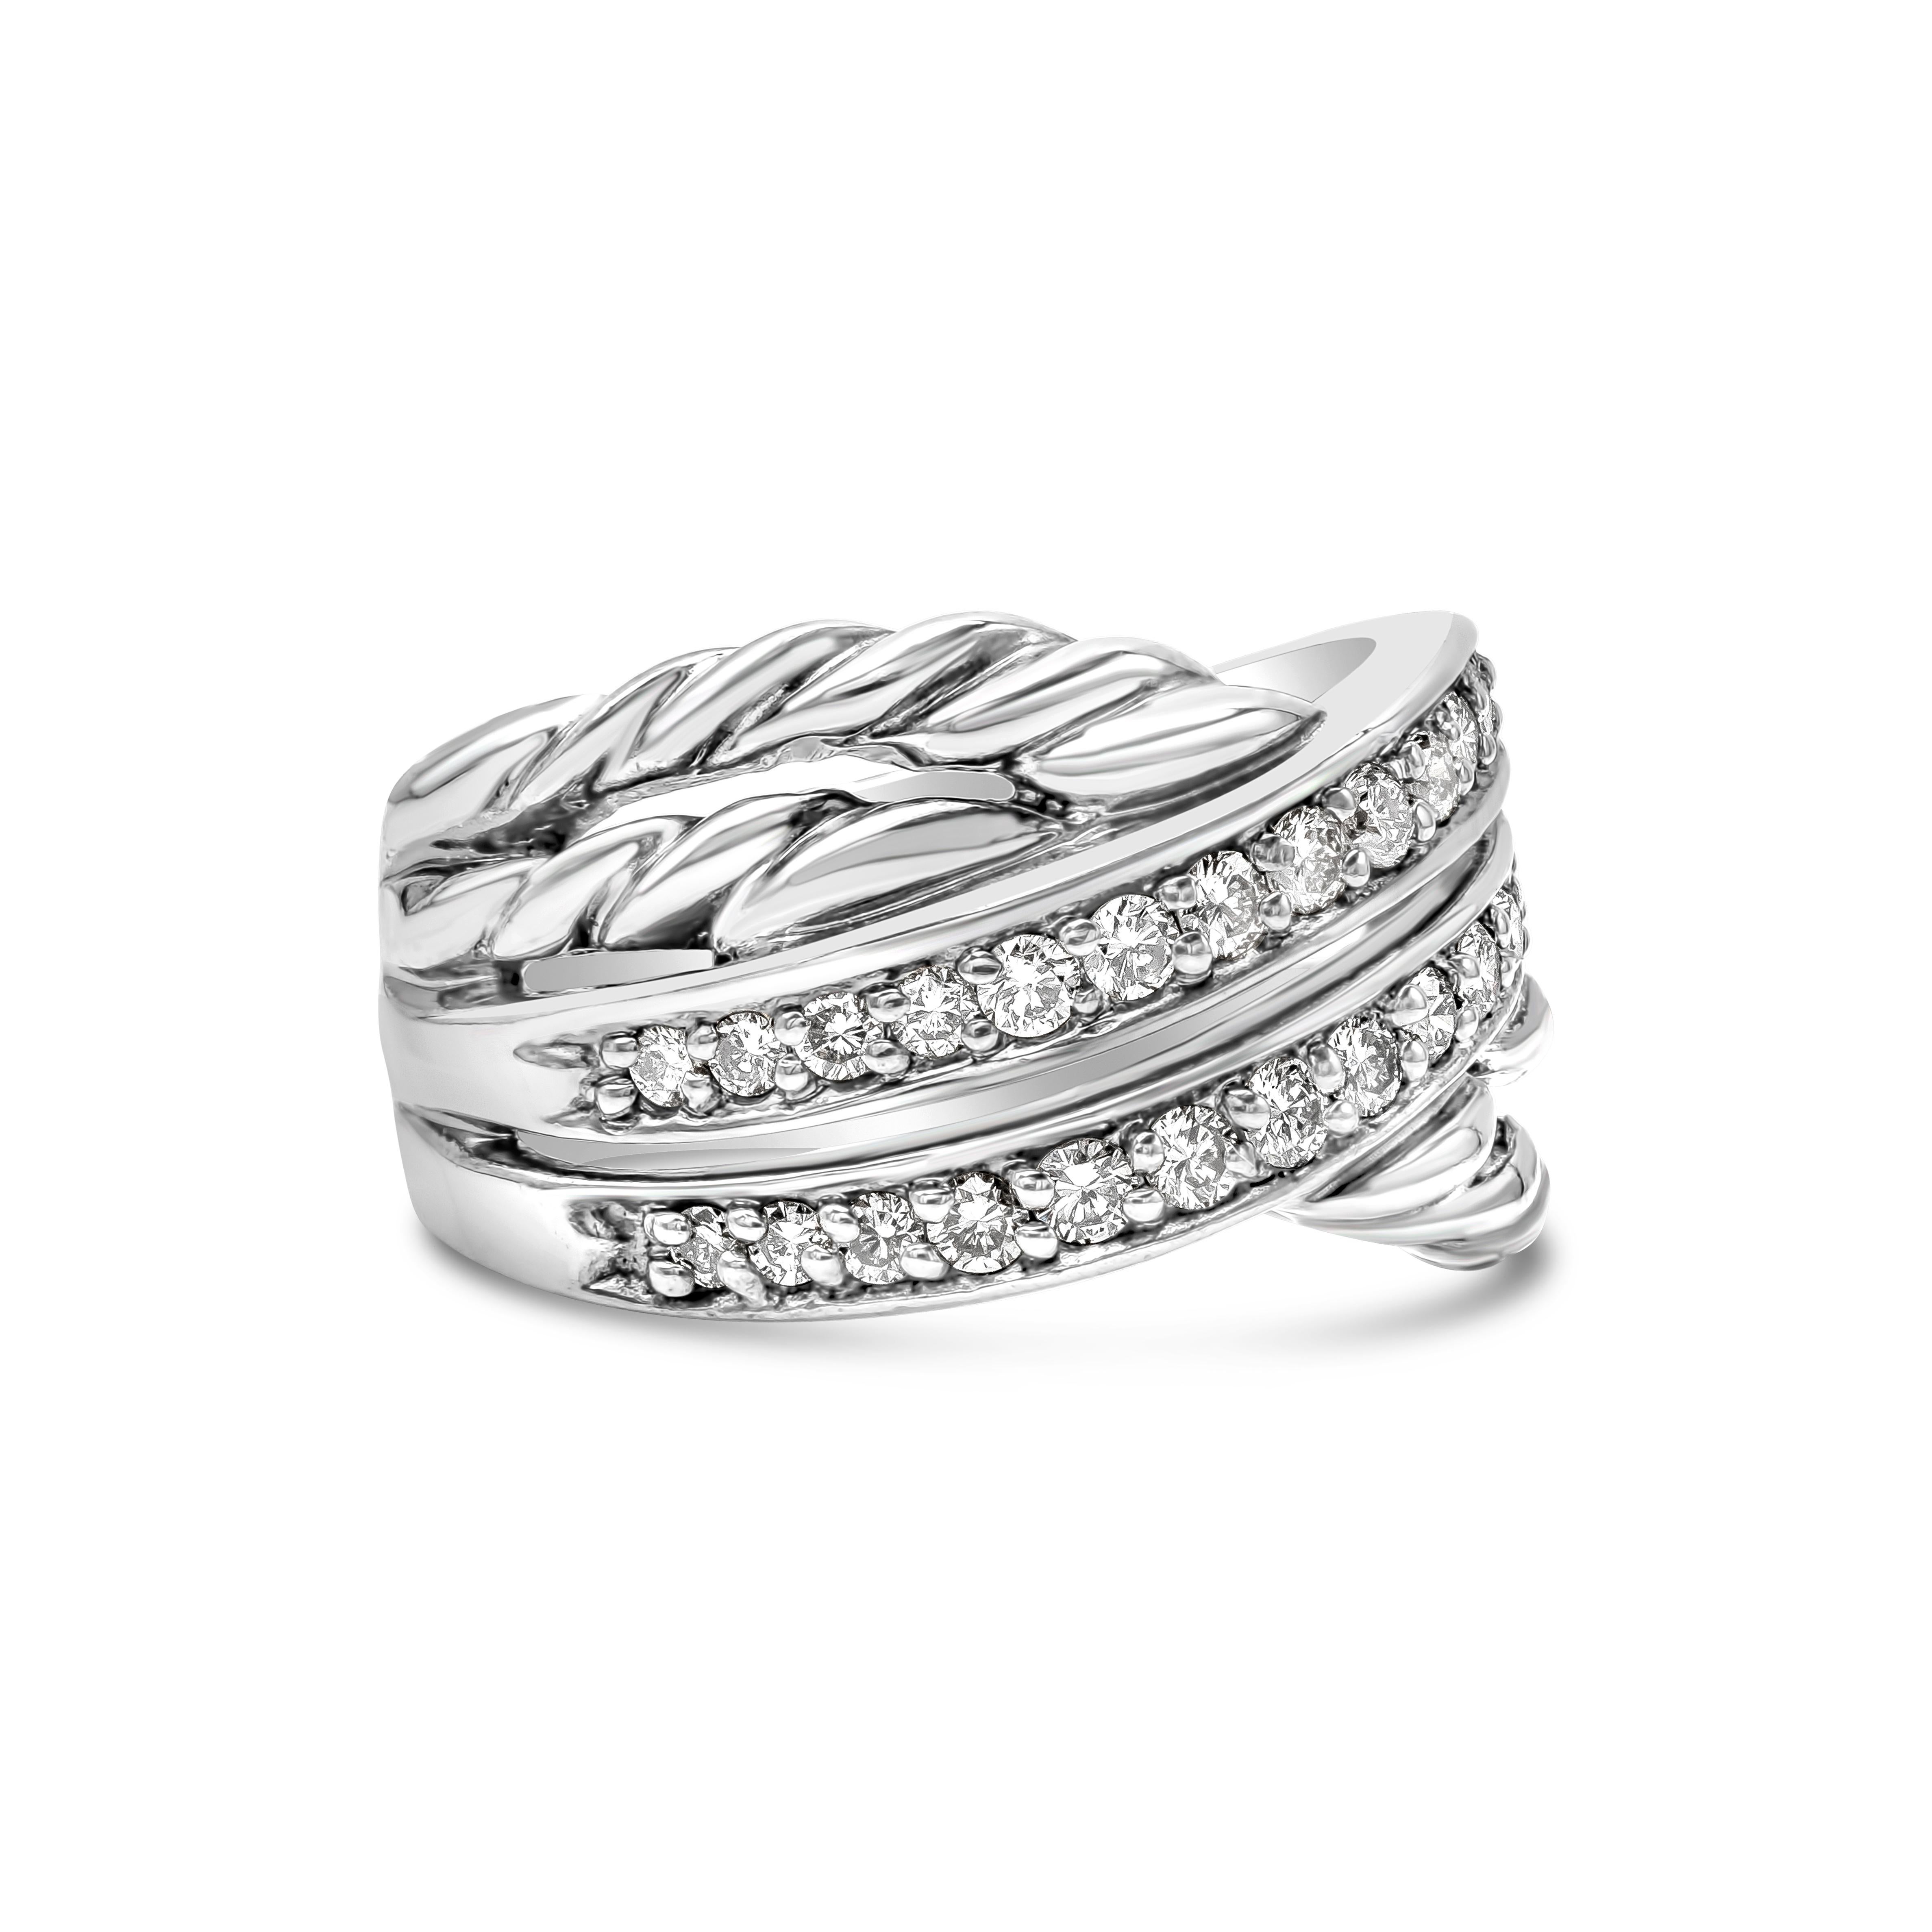 Showcasing a row of round brilliant diamonds that crossover to a rope design made in sterling silver. Diamonds weigh approximately 0.50 carats total. Made and stamped by David Yurman. Size 6 US resizable upon request and 12.2 mm in width.

